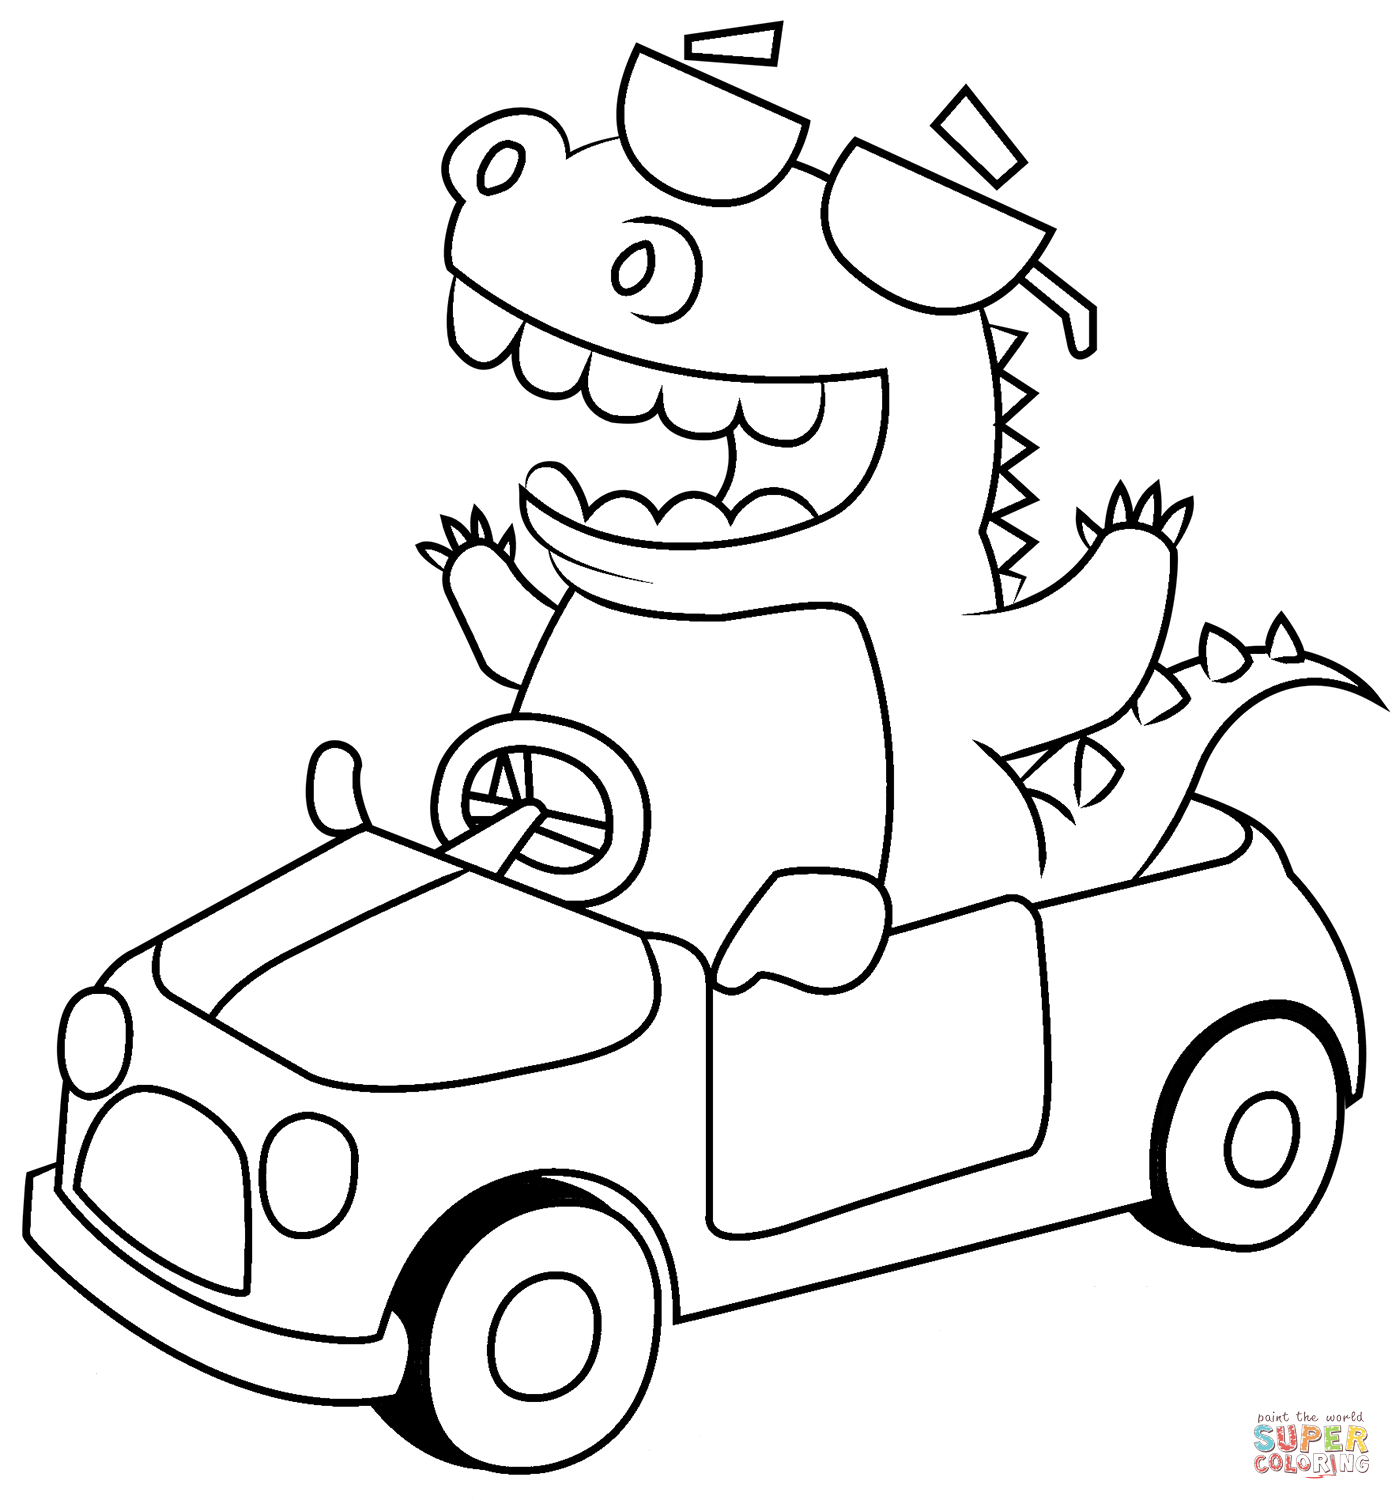 Dino in a car coloring page free printable coloring pages